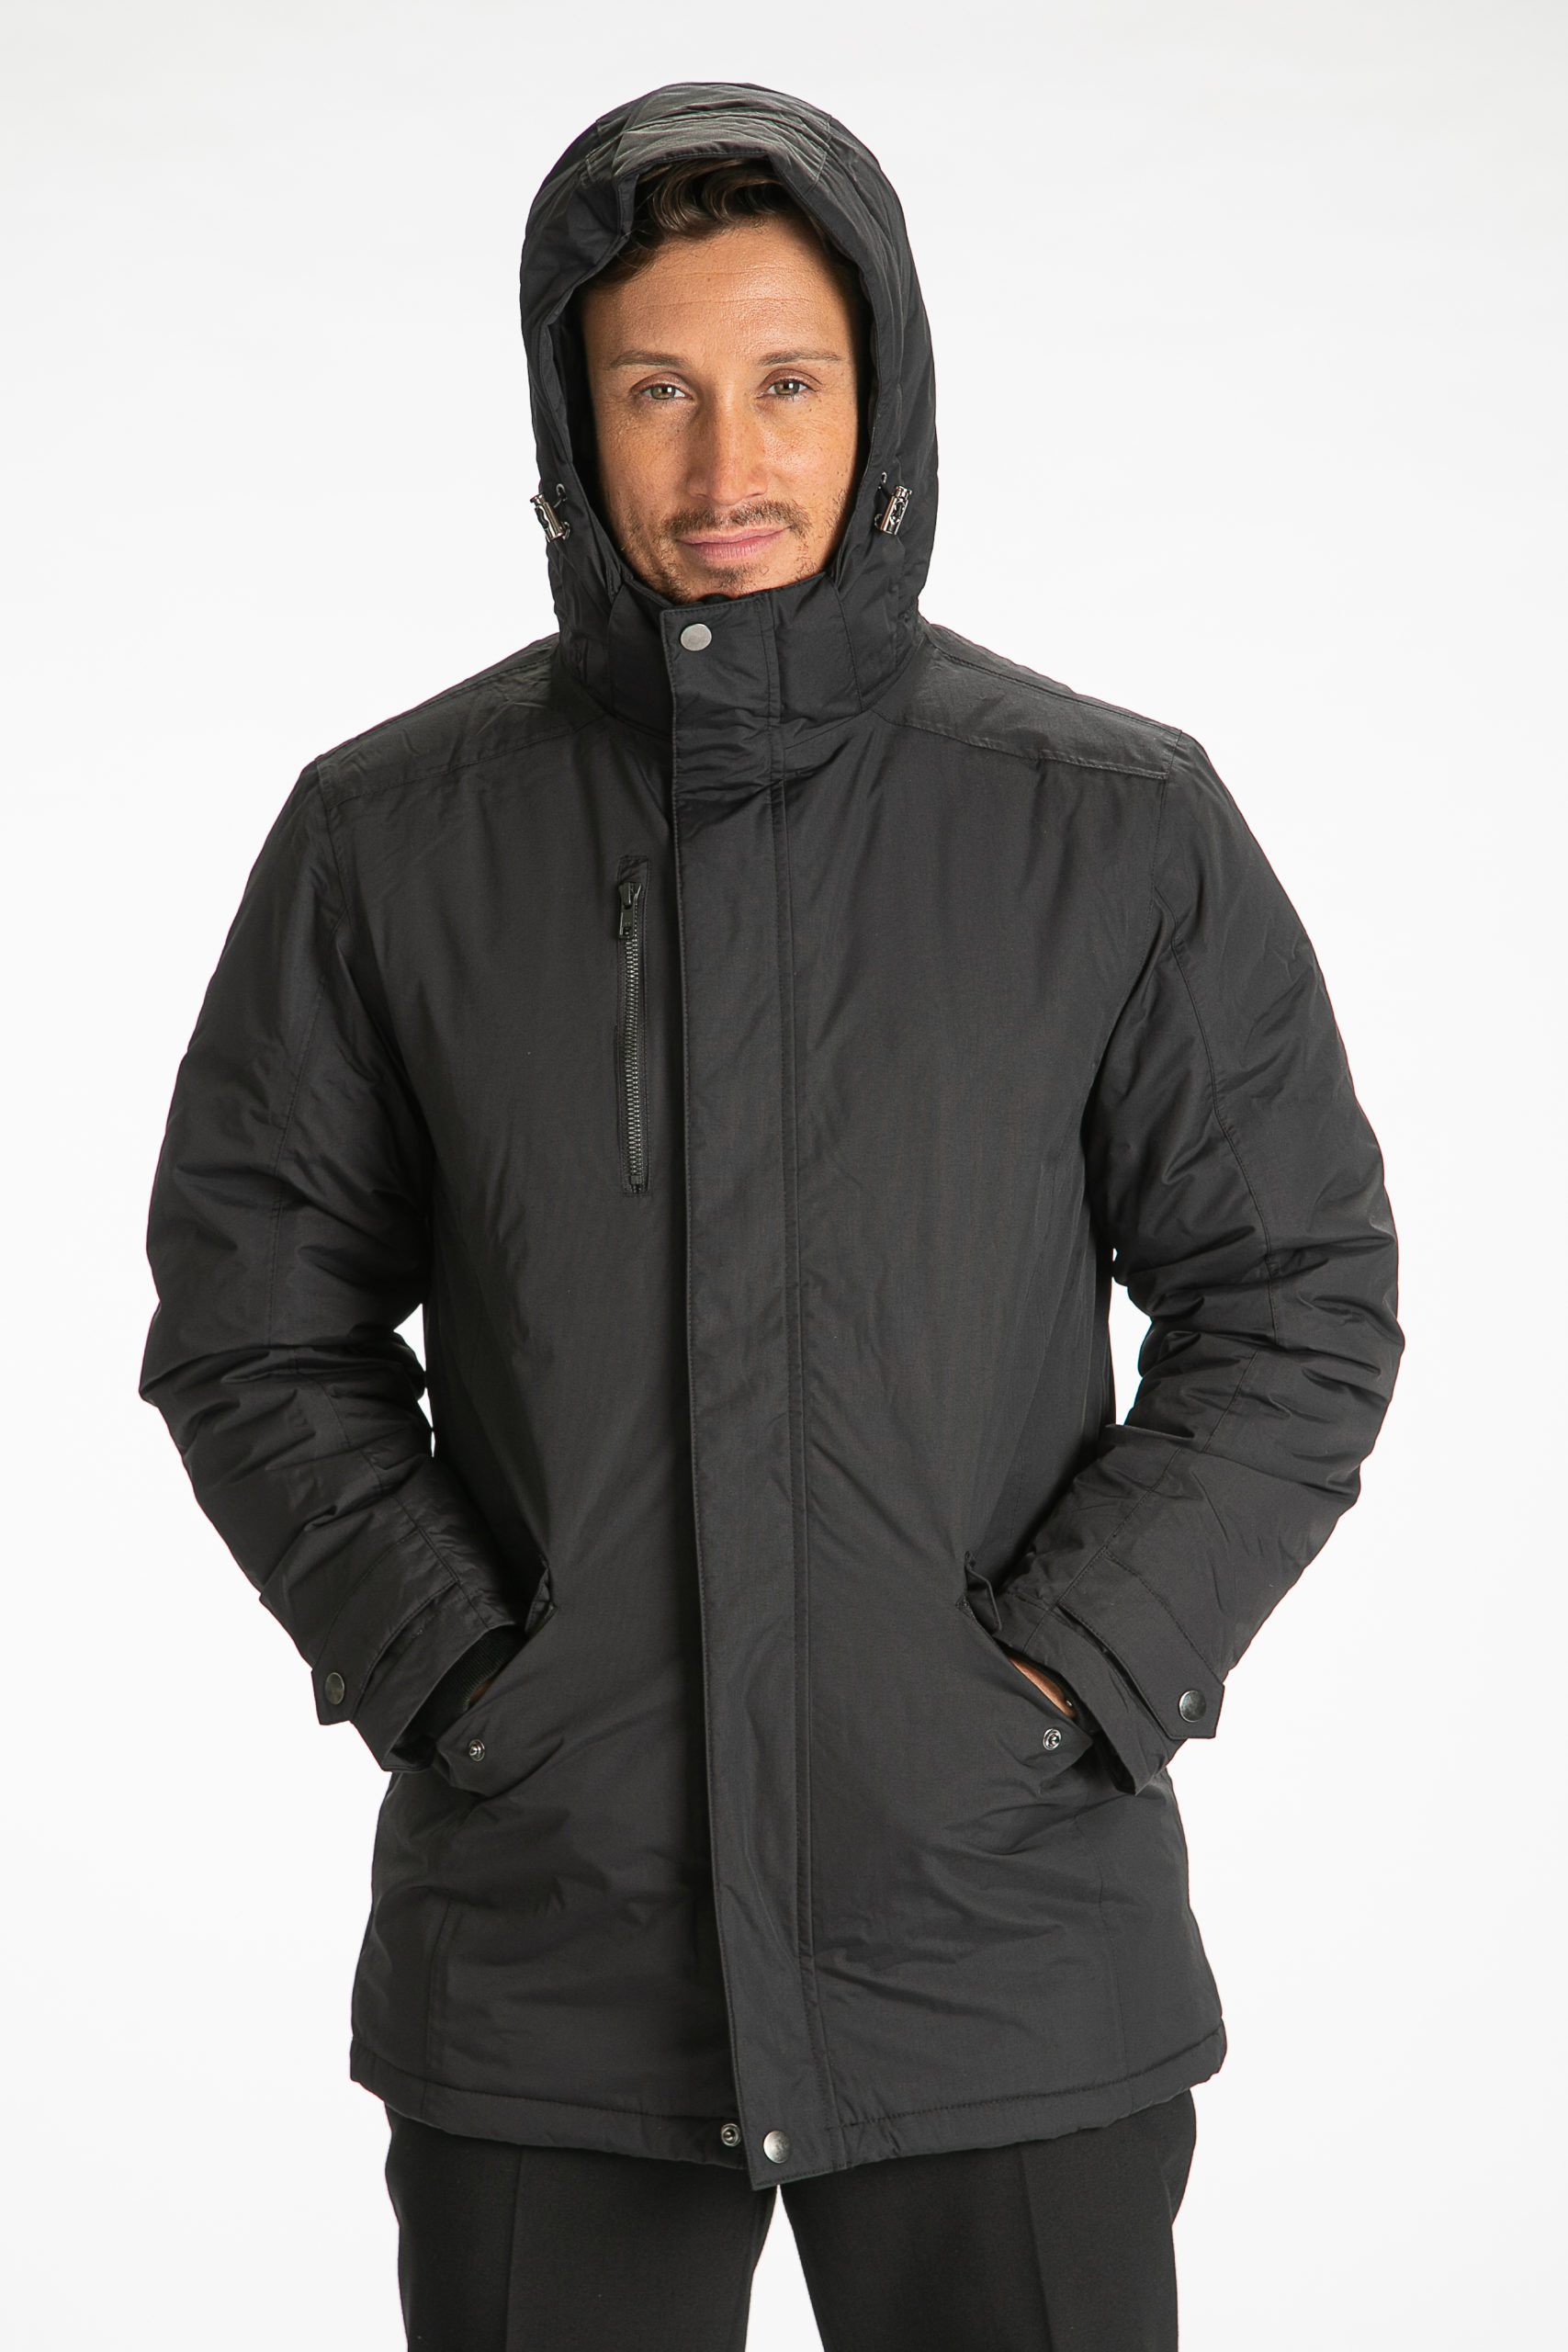 The AAC winter coat available in black only - Armstrong Aviation Clothing